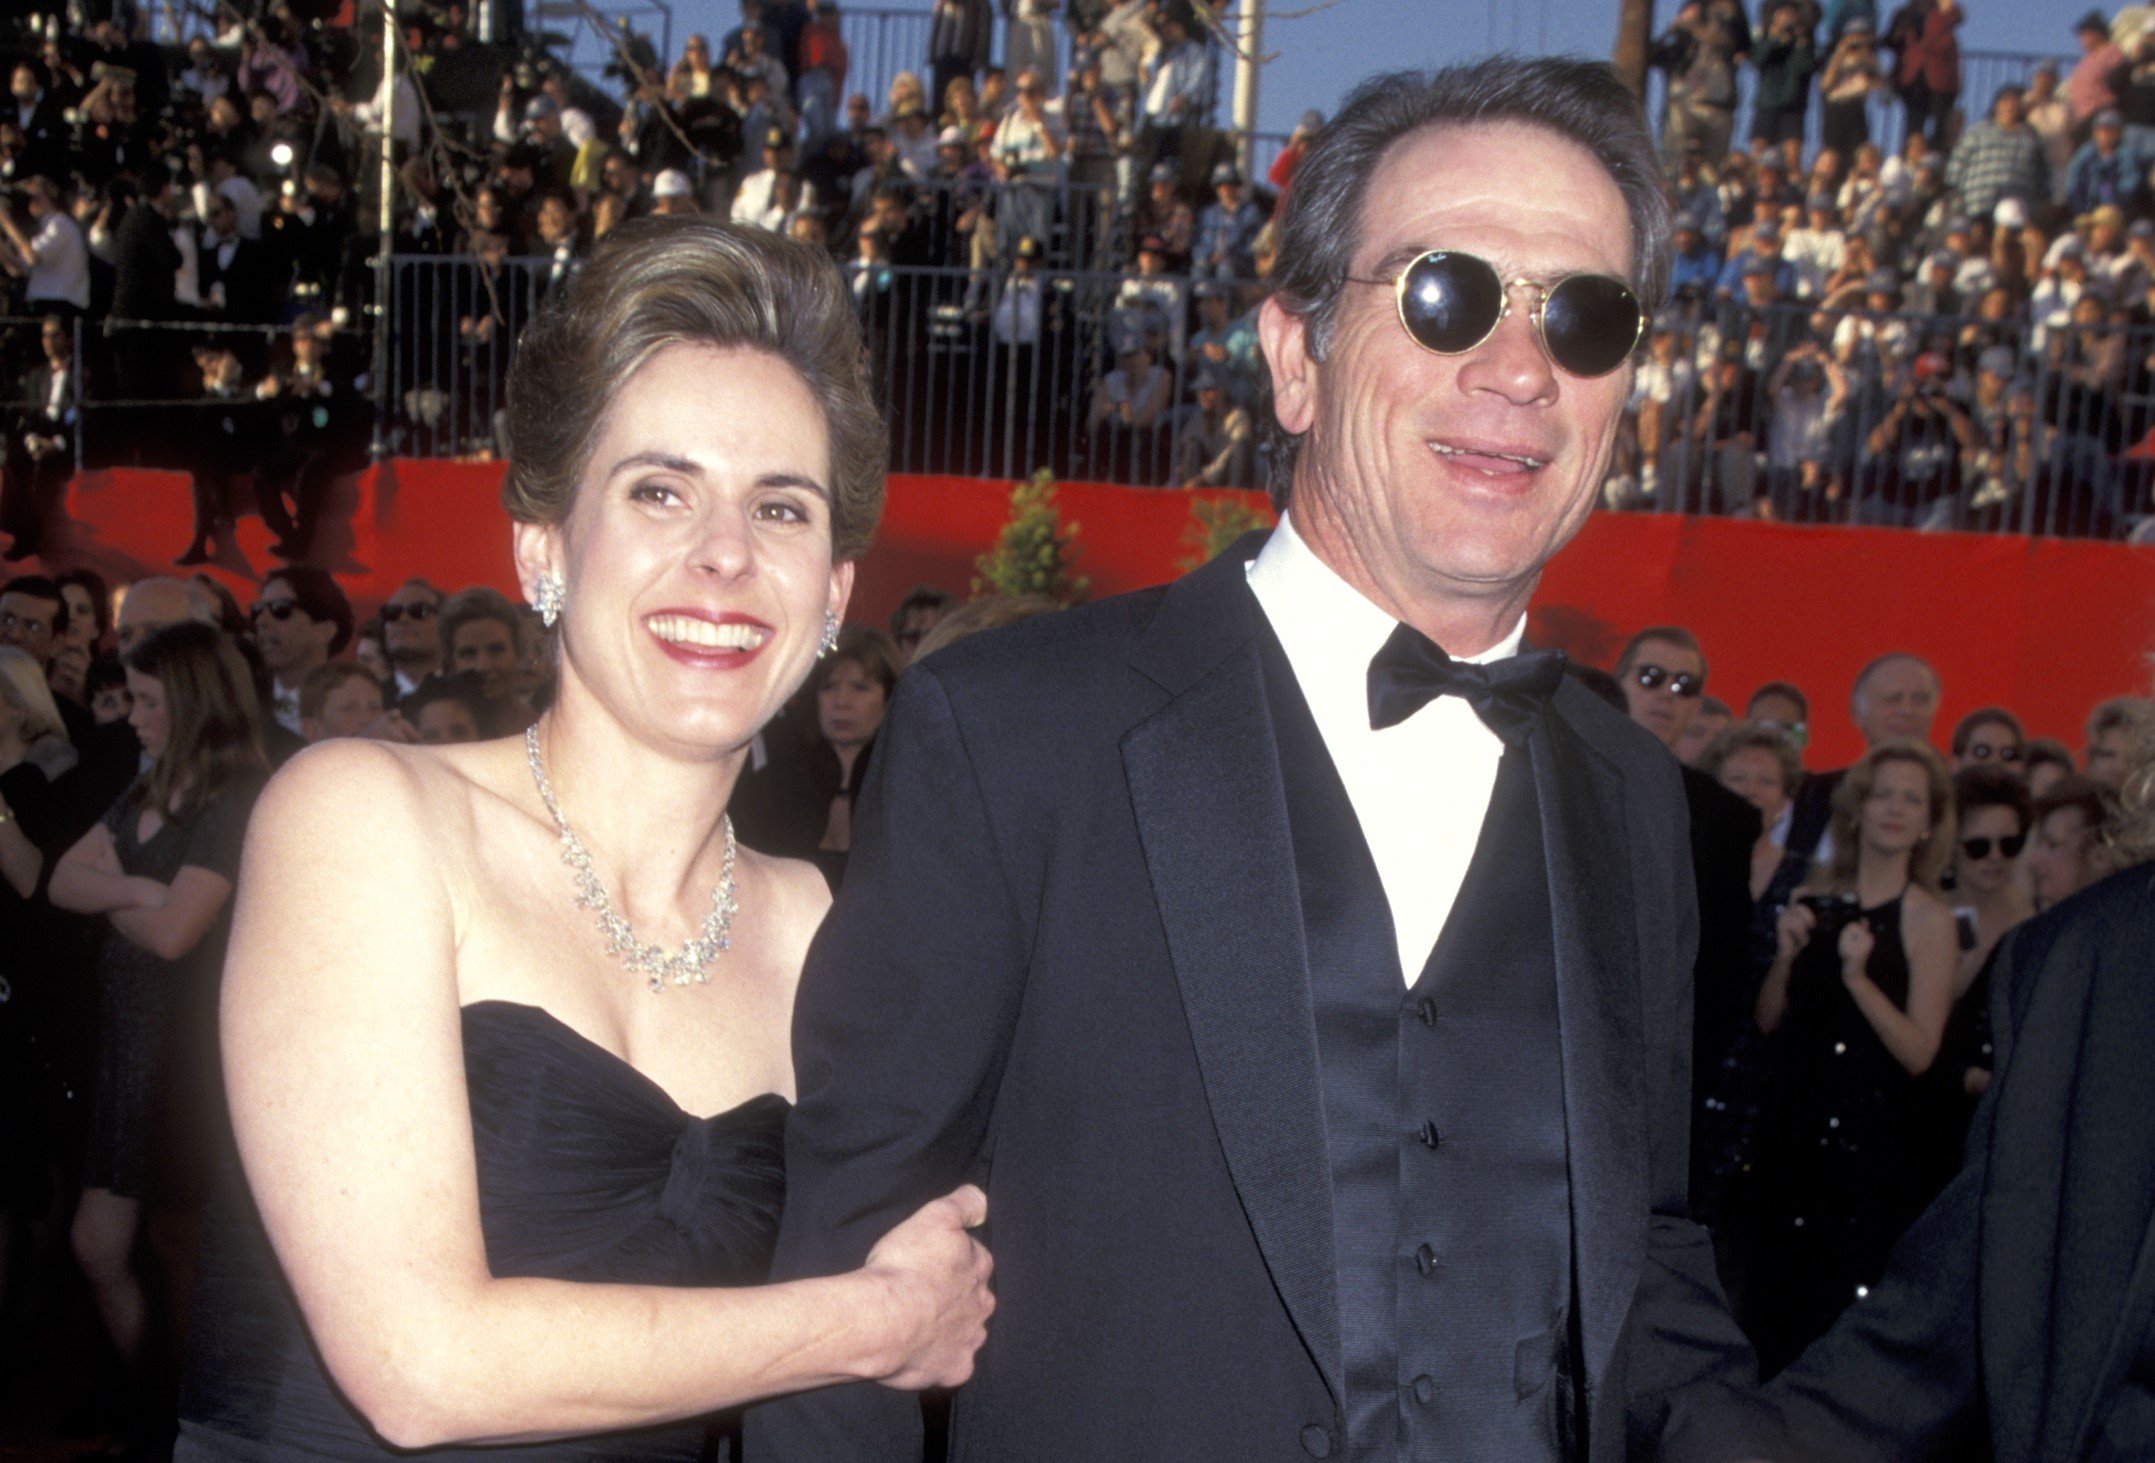 Tommy Lee Jones and Kimberlea Cloughley at the 67th Annual Academy Awards in Los Angeles, California, in 1995. | Source: Getty Images